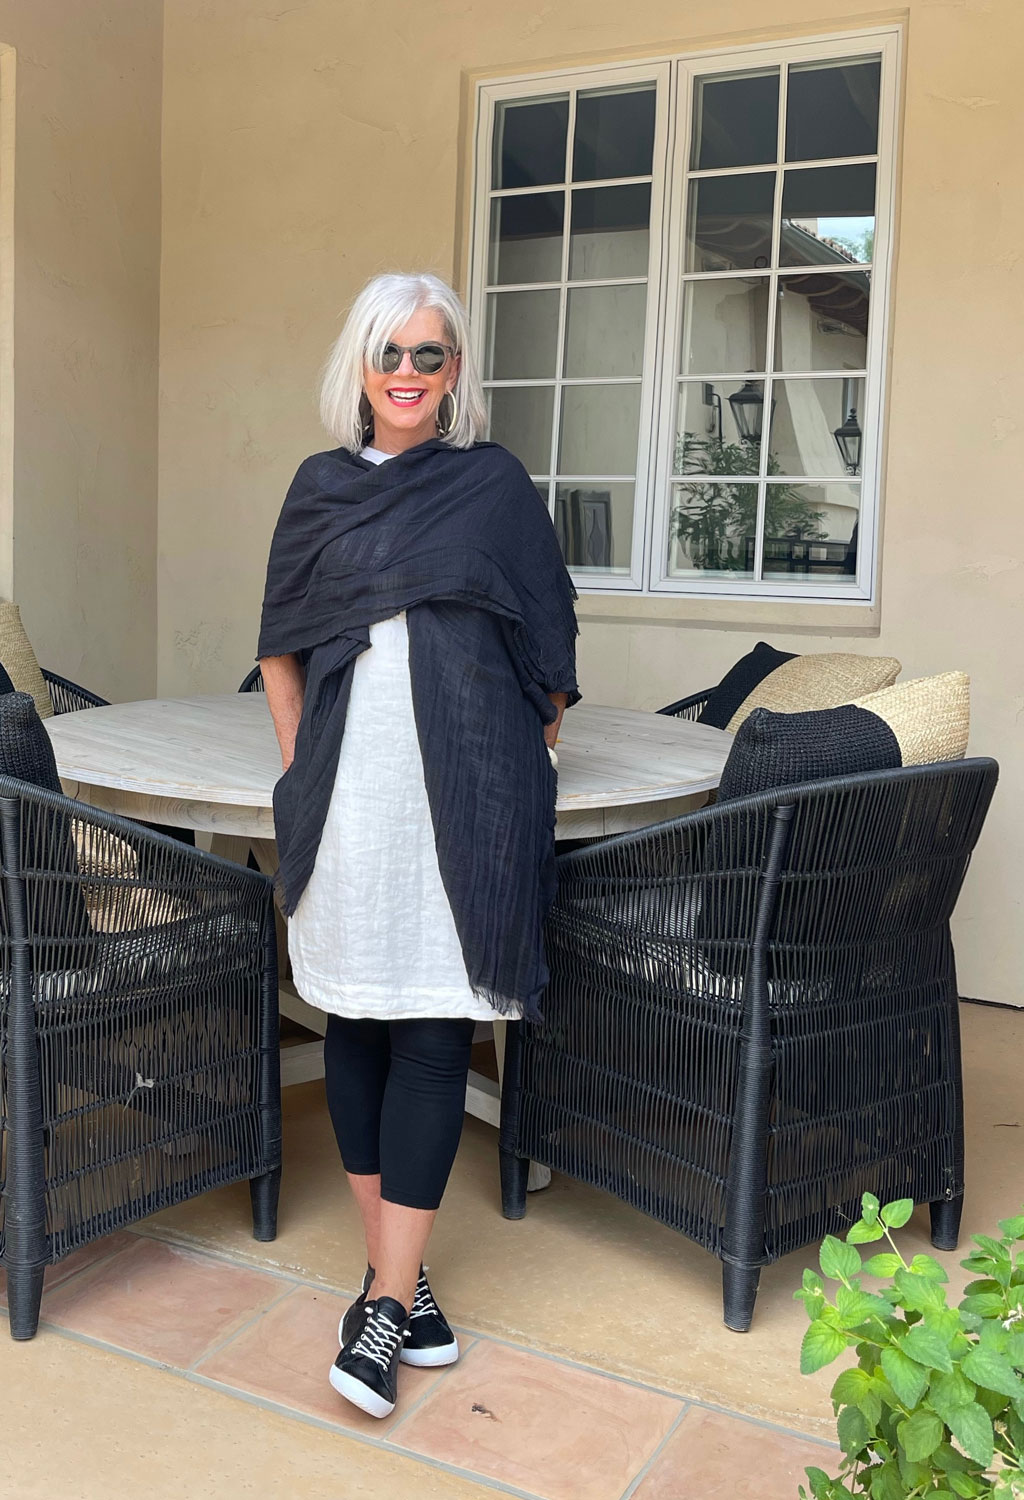 over 50 style blogger cindy hattersley in black and white